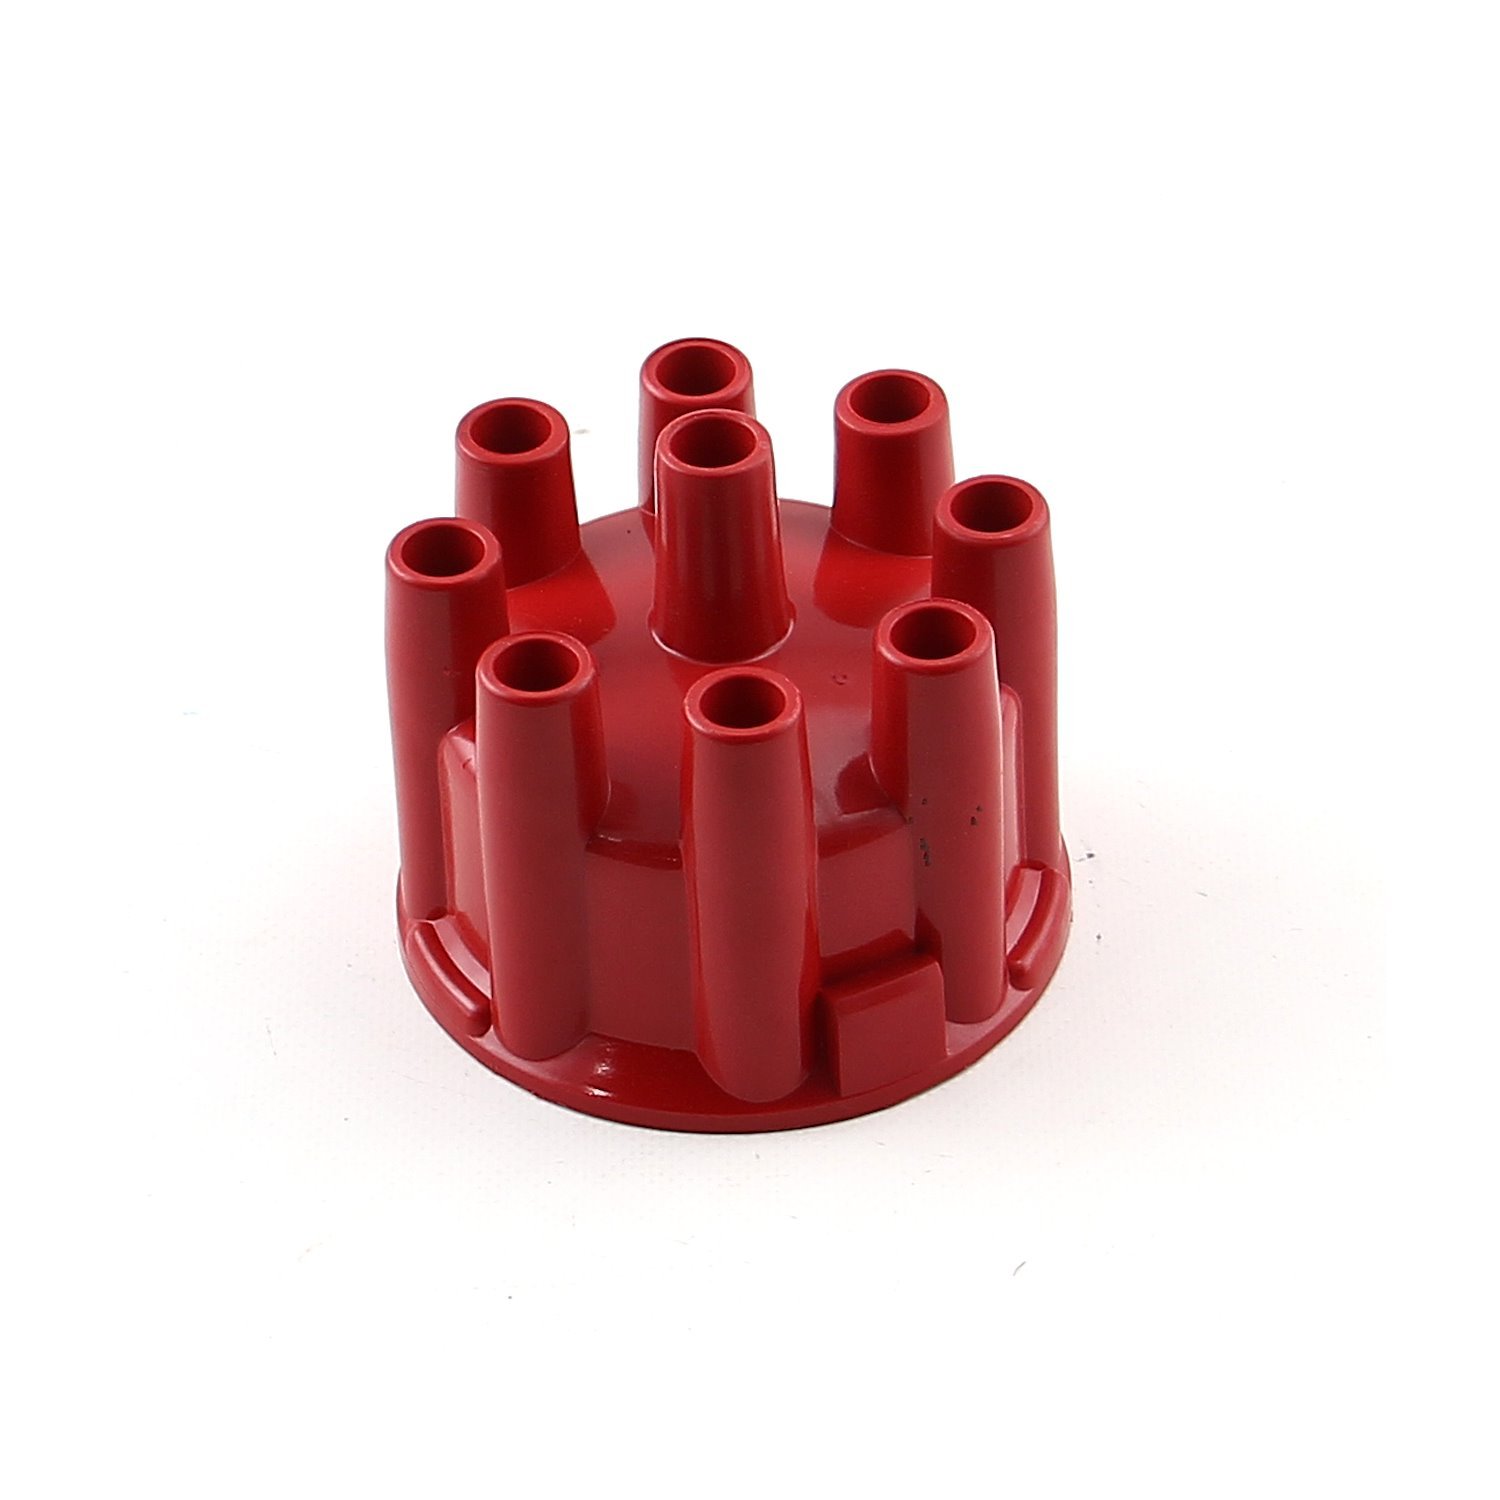 Distributor Cap Red For 7000 and 8000 Serie Distributor